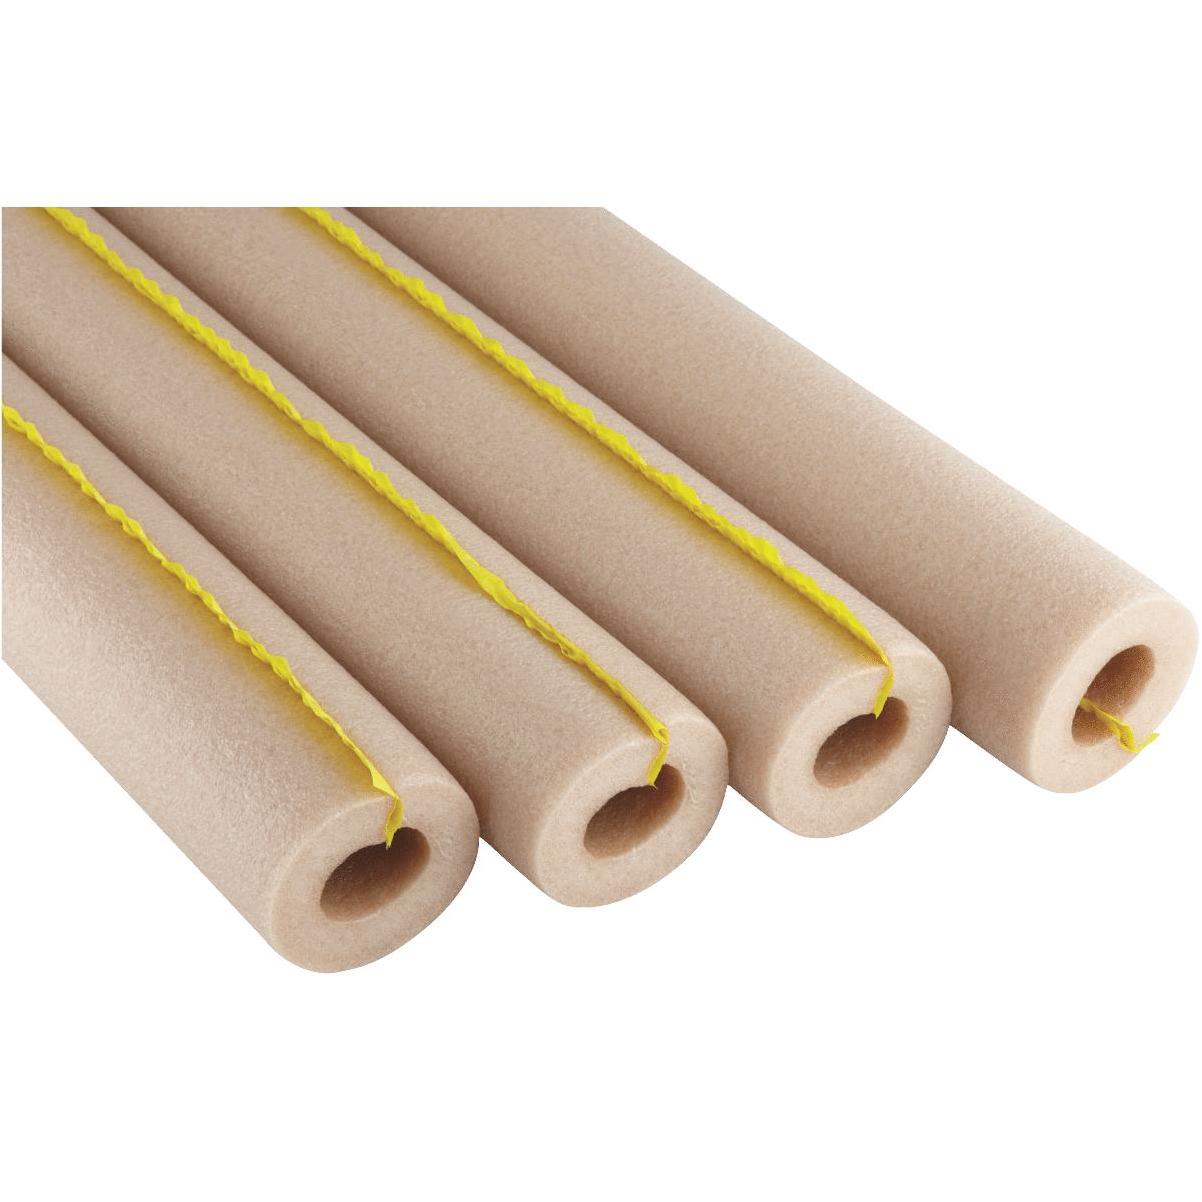 Tundra 1/2 In. Wall Self-Sealing Tee Polyethylene Pipe Insulation Wrap, 3/4  In. Fits Pipe Size 3/4 In. Copper